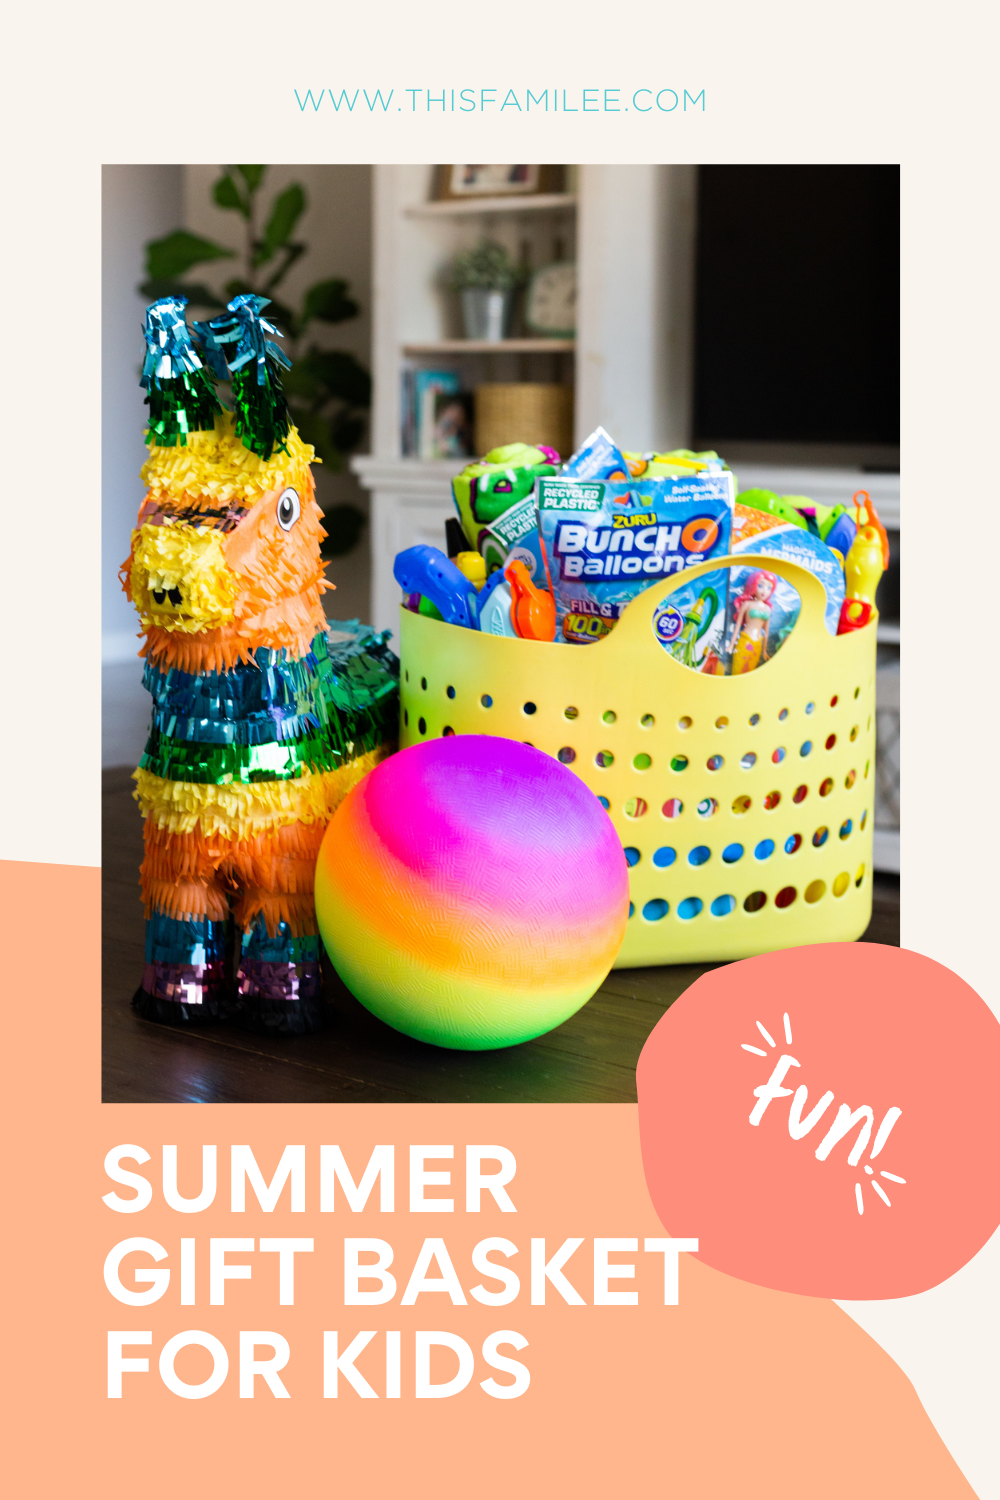 Summer Gift Basket for Kids | www.thisfamilee.com